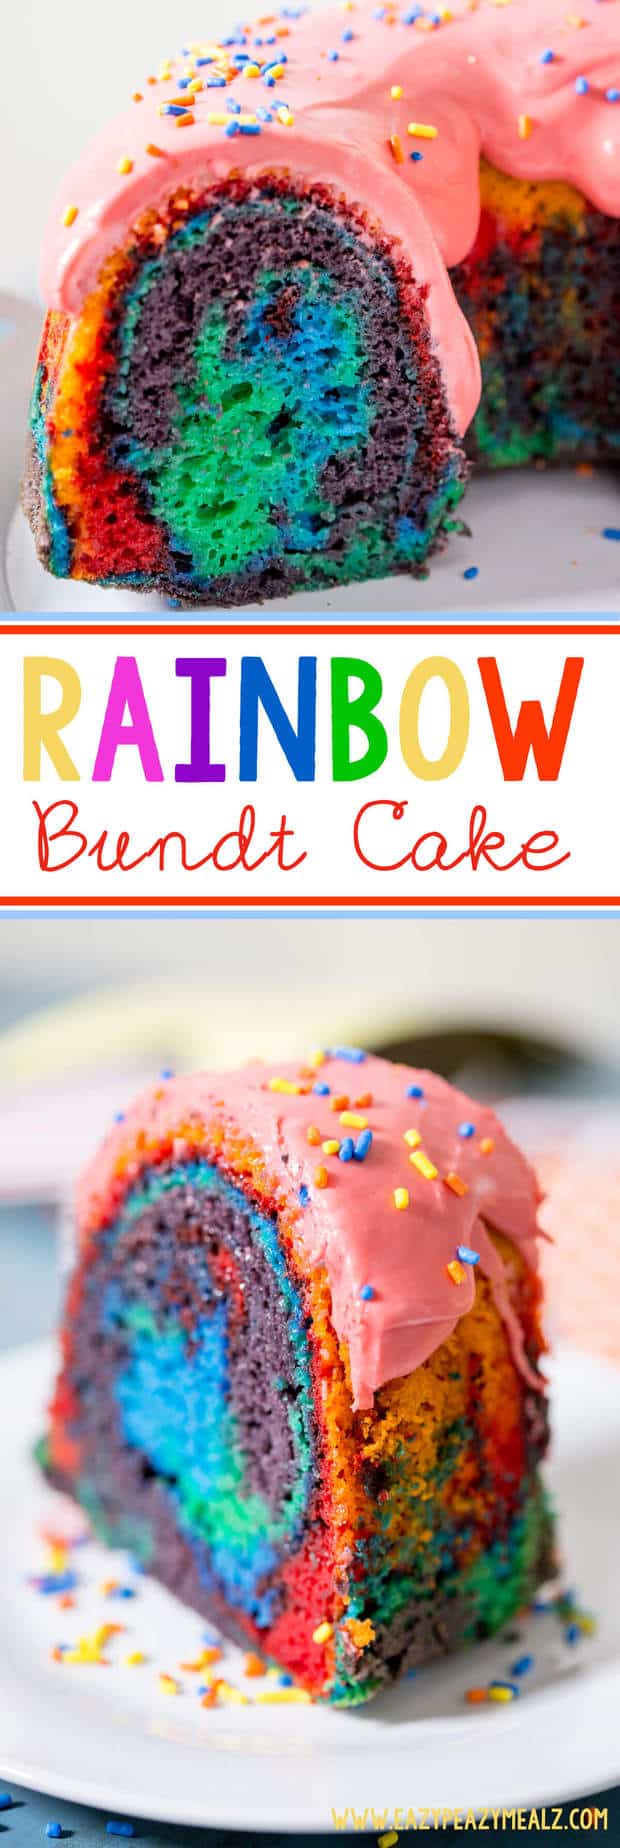 Rainbow Bundt Cake -- A classic vanilla bundt cake amped up into rainbow colored fun with a raspberry glaze and sprinkles! Perfect for St. Patrick’s Day or a party